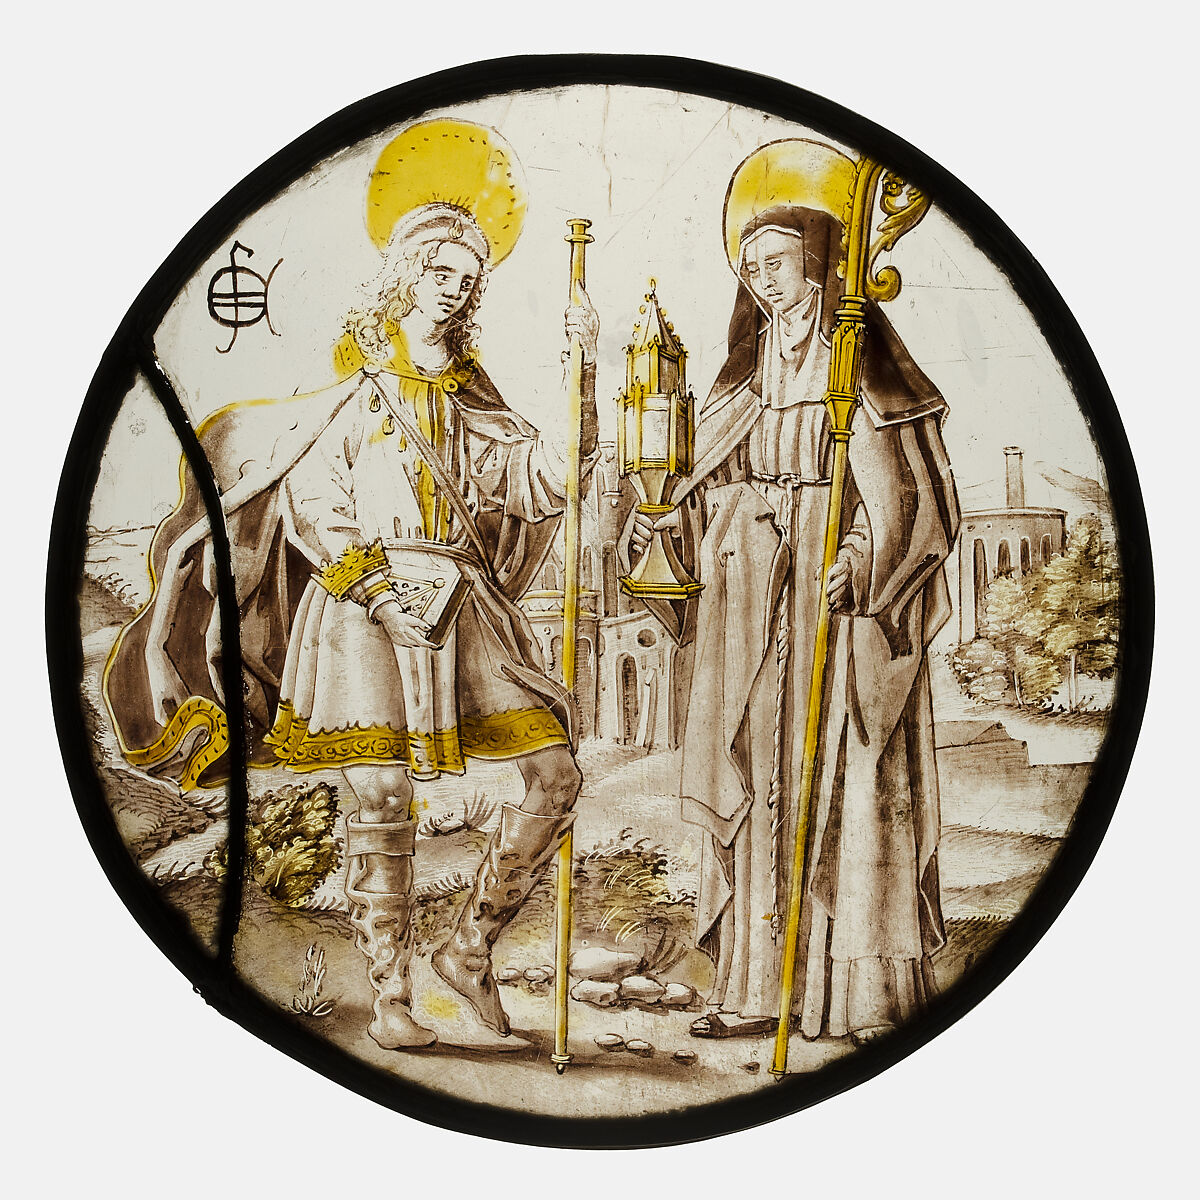 Roundel with Saint Jodocus and St. Clare of Assisi, Colorless glass, silver stain, vitreous paint, South Netherlandish 